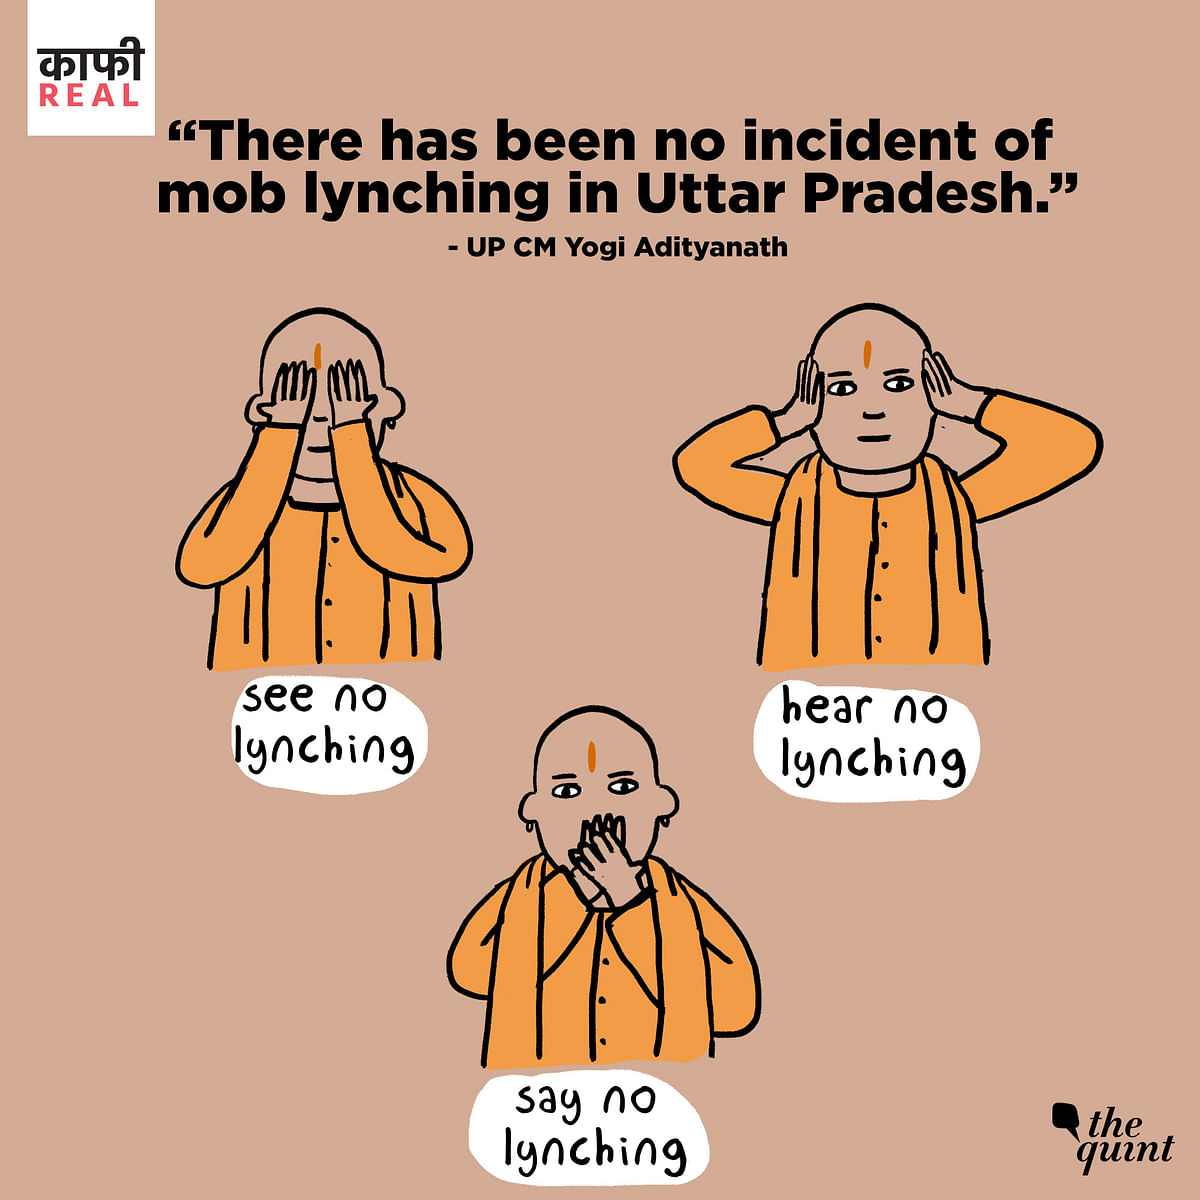 In a recent interview, CM Yogi Adityanath boasted, “There has been no incident of mob lynching in UP”. Of course.